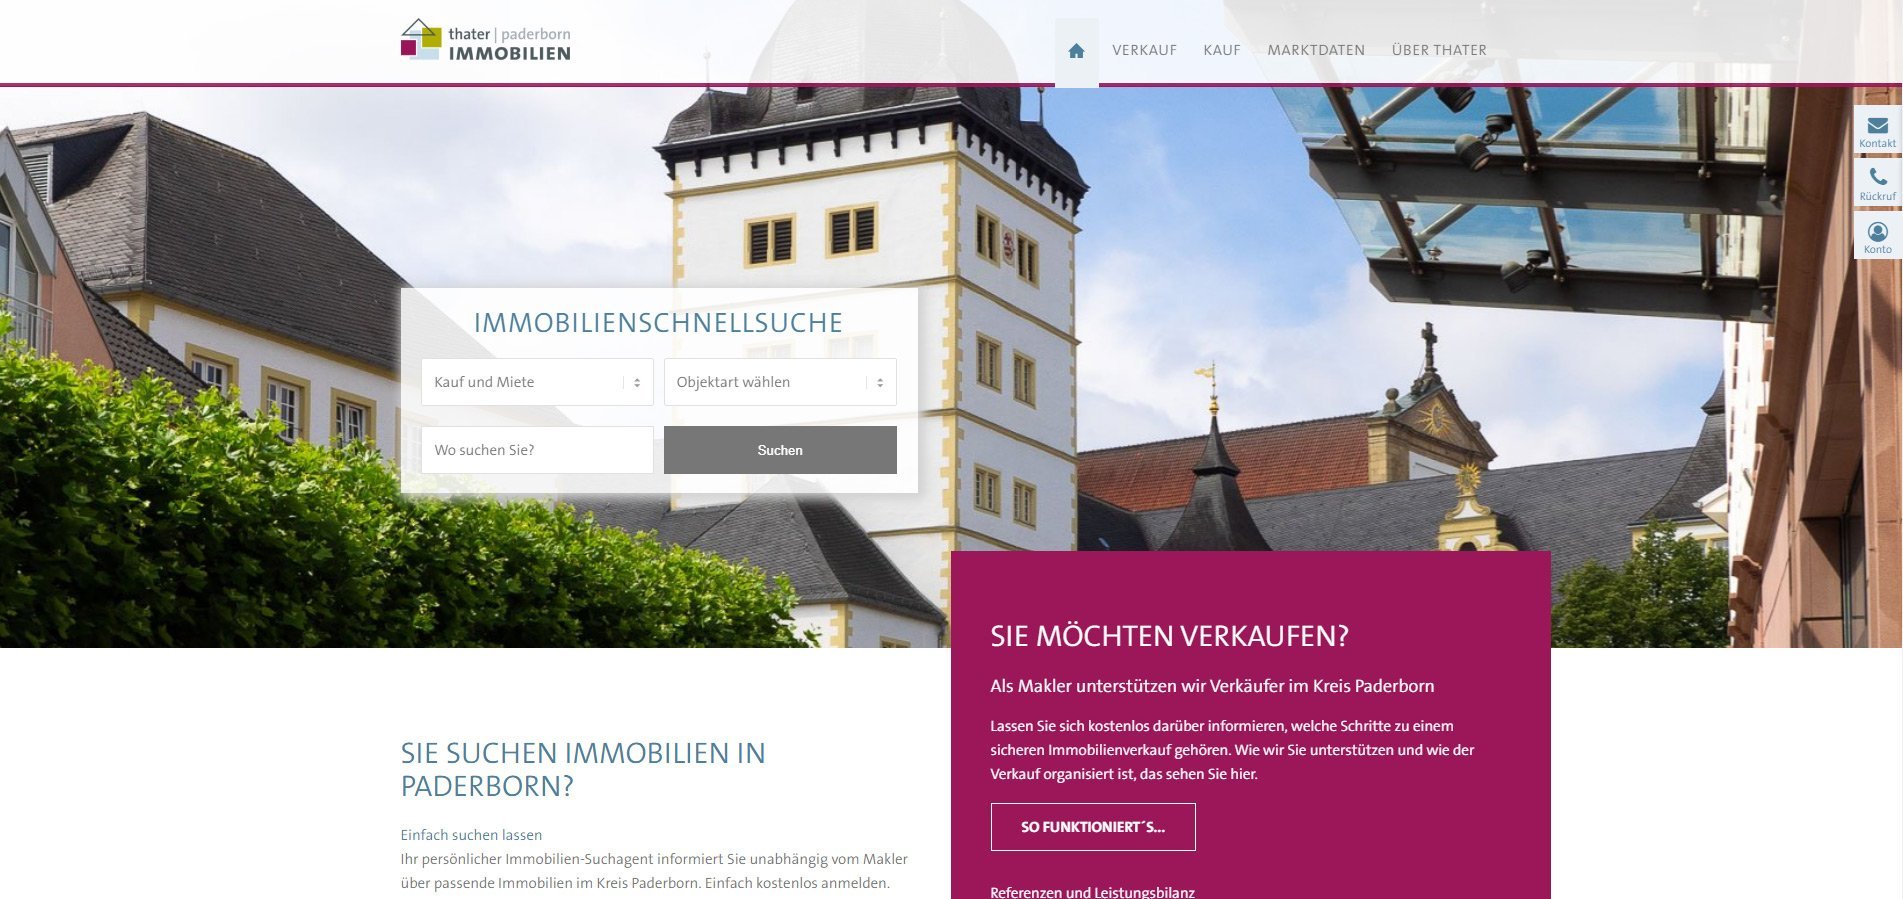 neue-webseite-thater-immobilien-paderborn